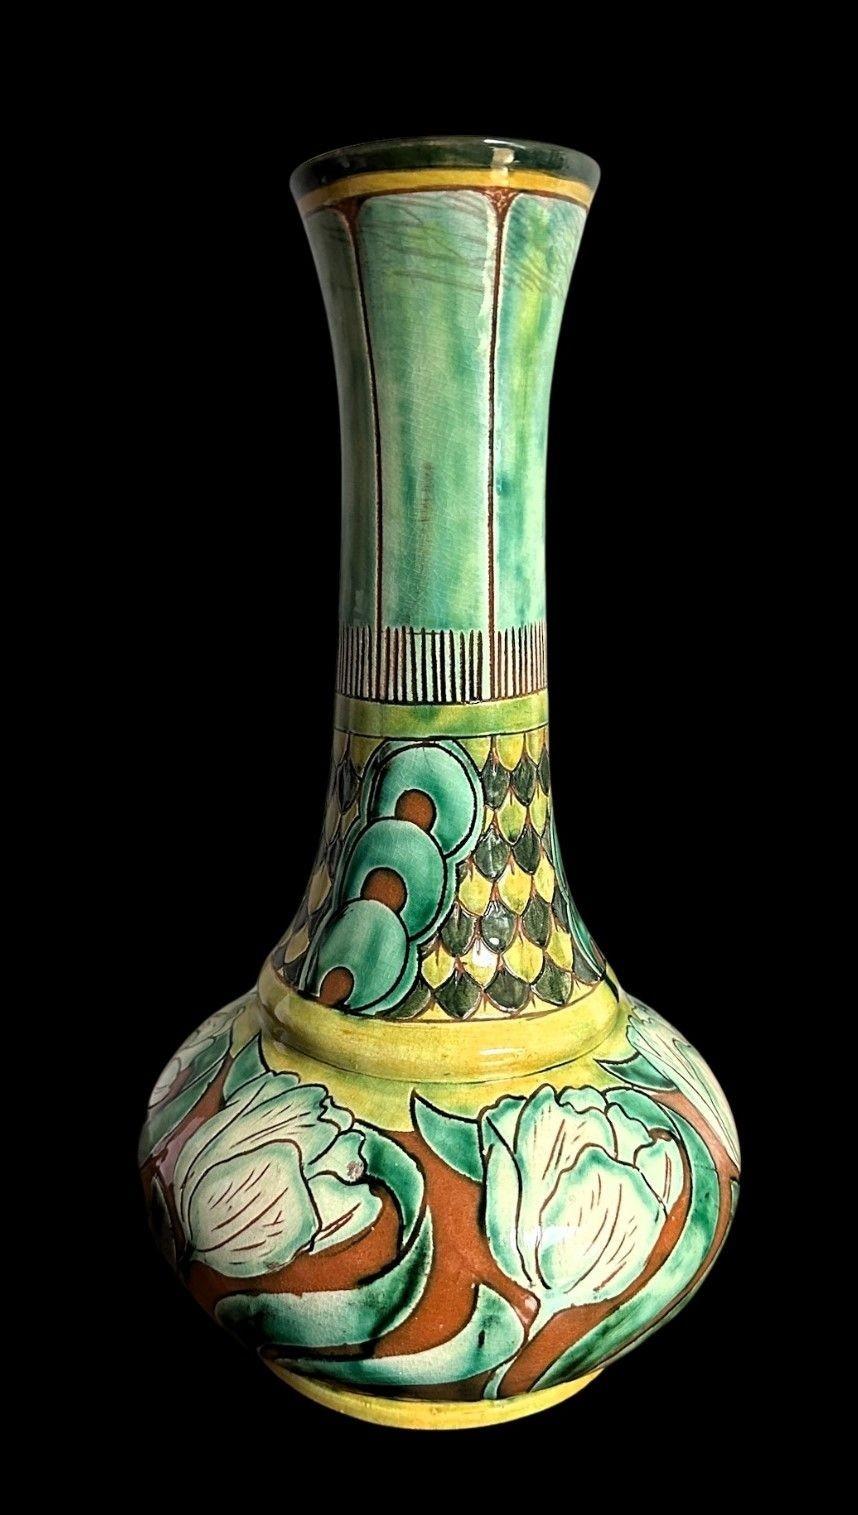 5484
Large Della Robbia Vase decorated in an Art Nouveay Design of Stylised Tulips below a scolloped neck by Charles Collis
Light crazing with a little staining to the neck and a glaze frit to the body
32cm high, 16cm wide
Circa 1900